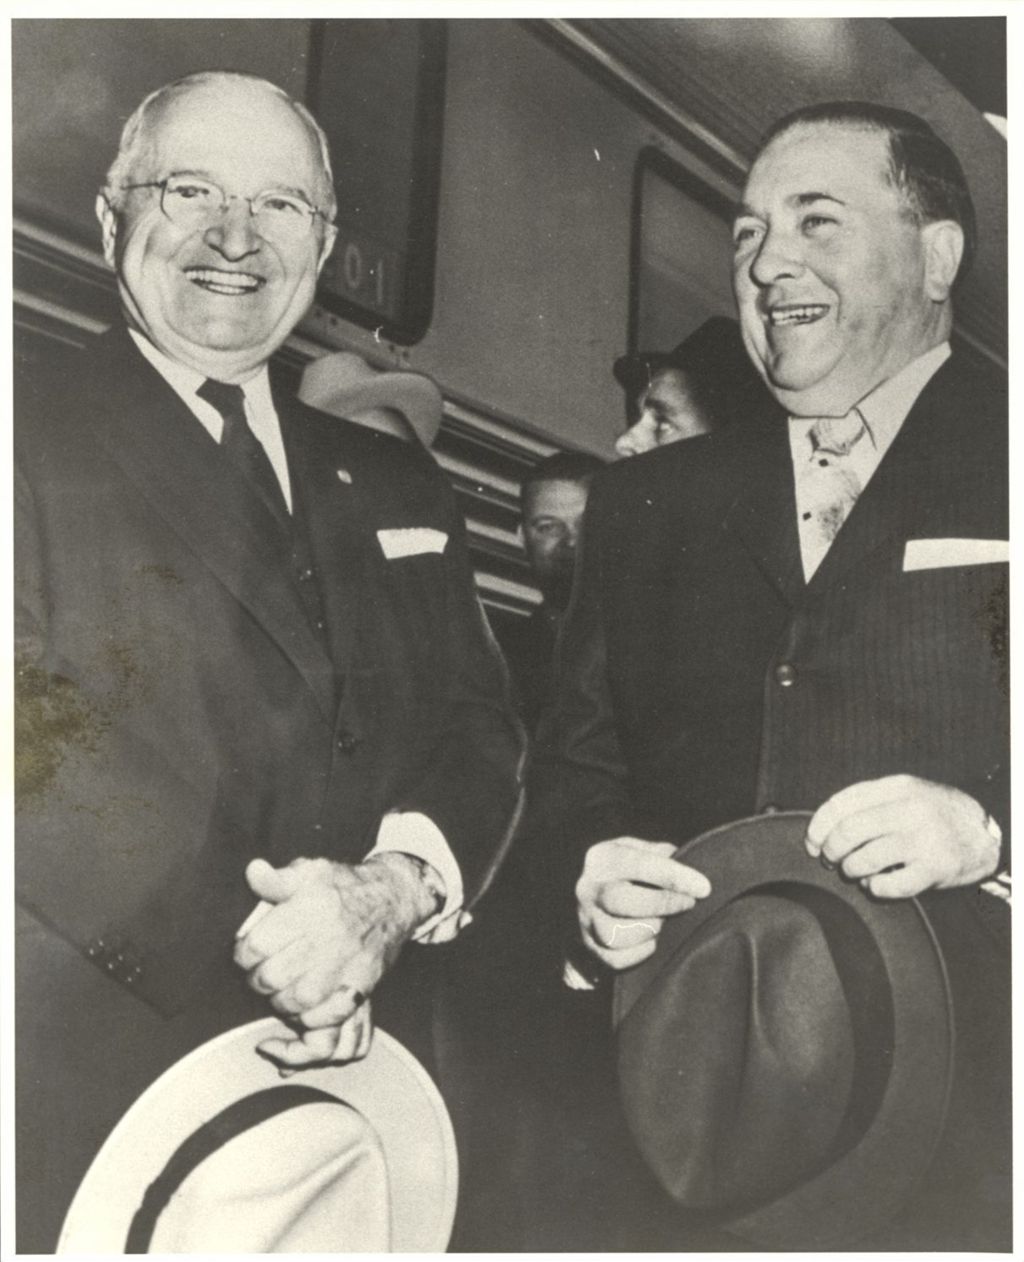 Harry S. Truman and Richard J. Daley standing together, smiling